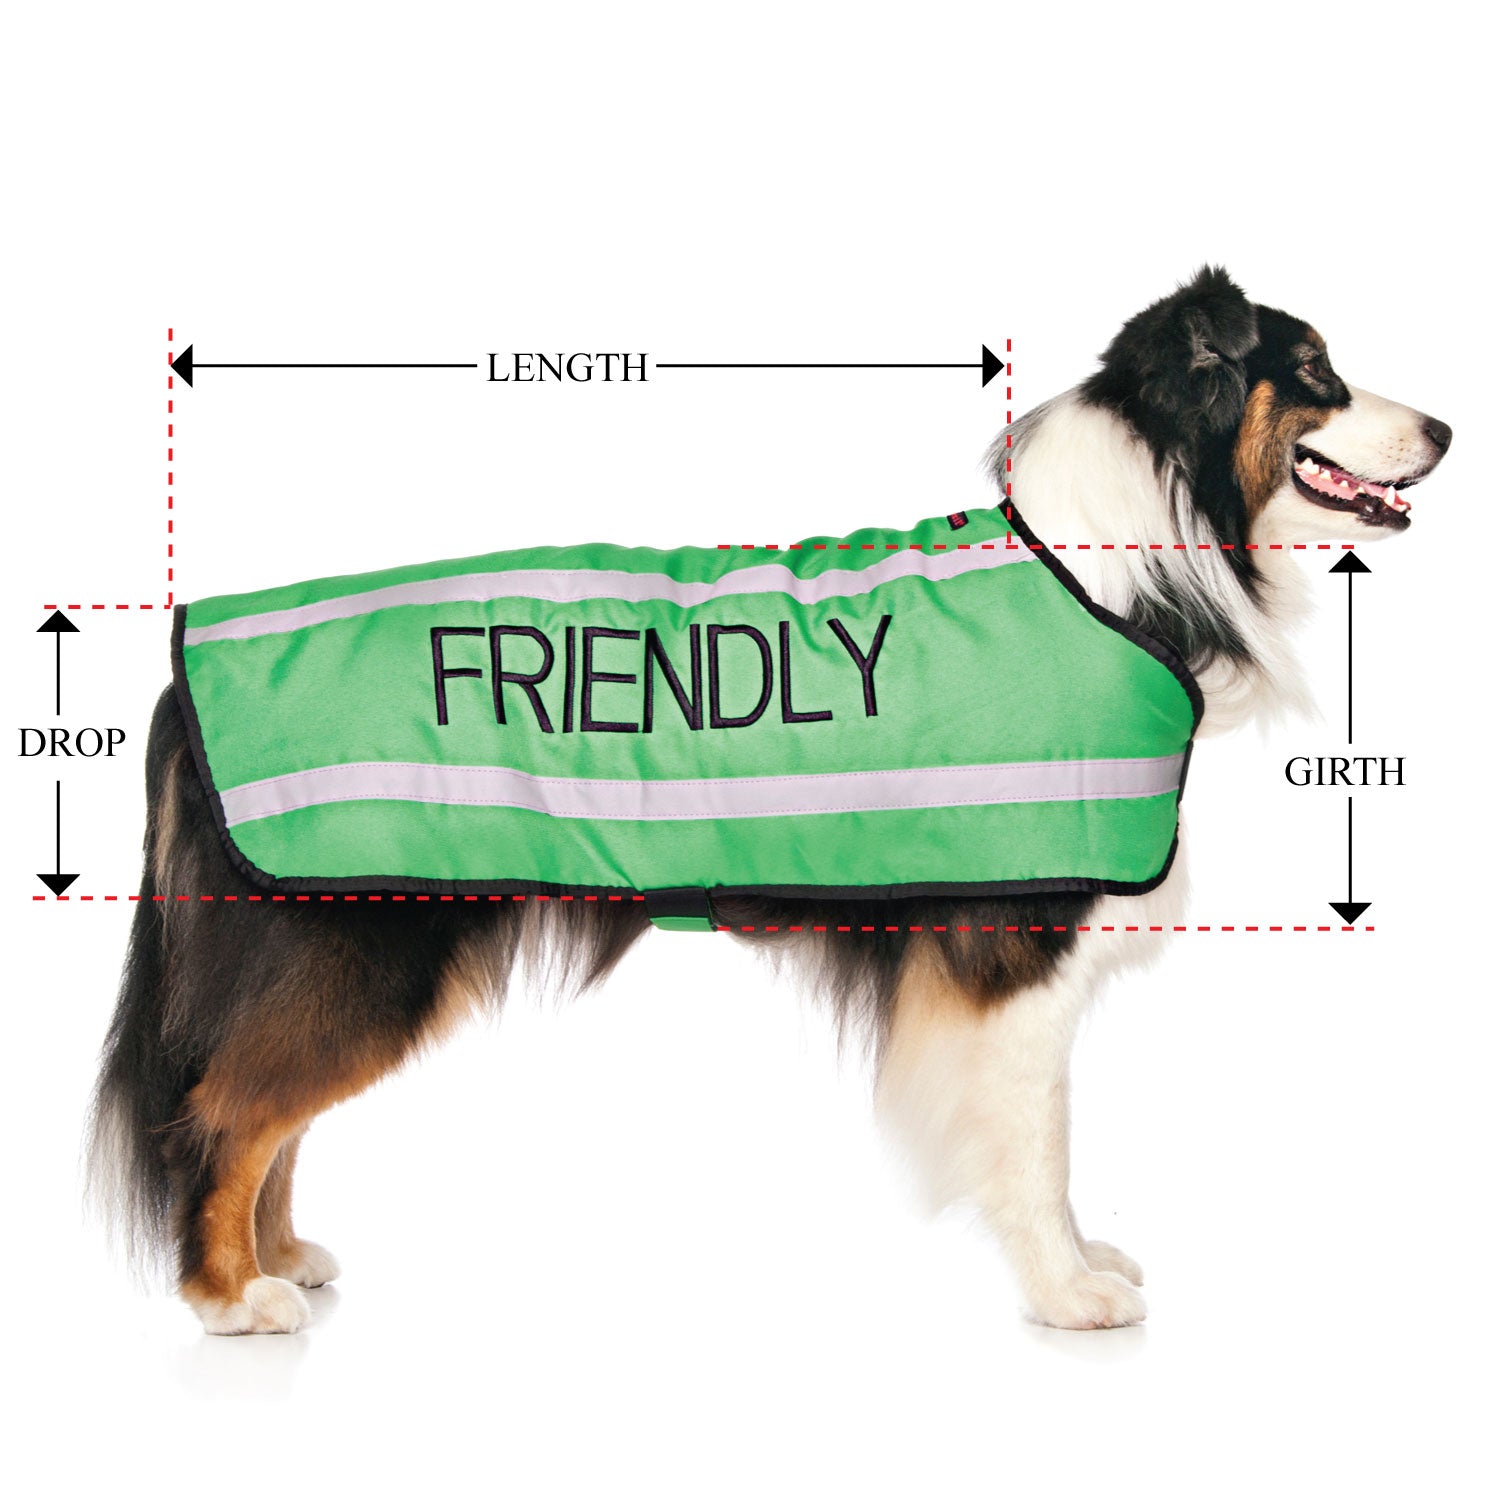 FRIENDLY - Large Coat (discontinued) Wording embroidered NOT printed